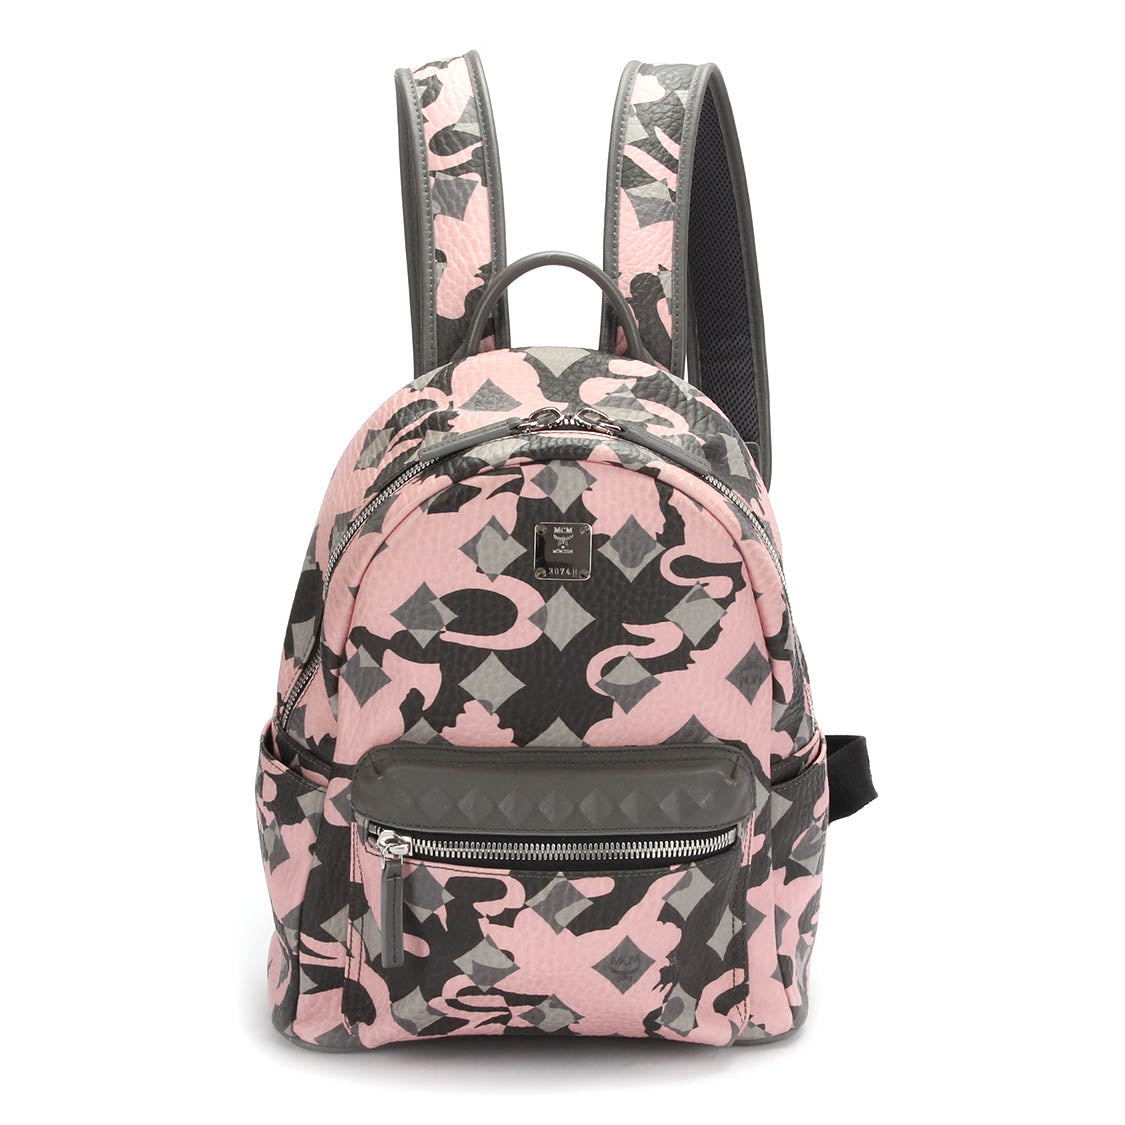 Printed Leather Backpack